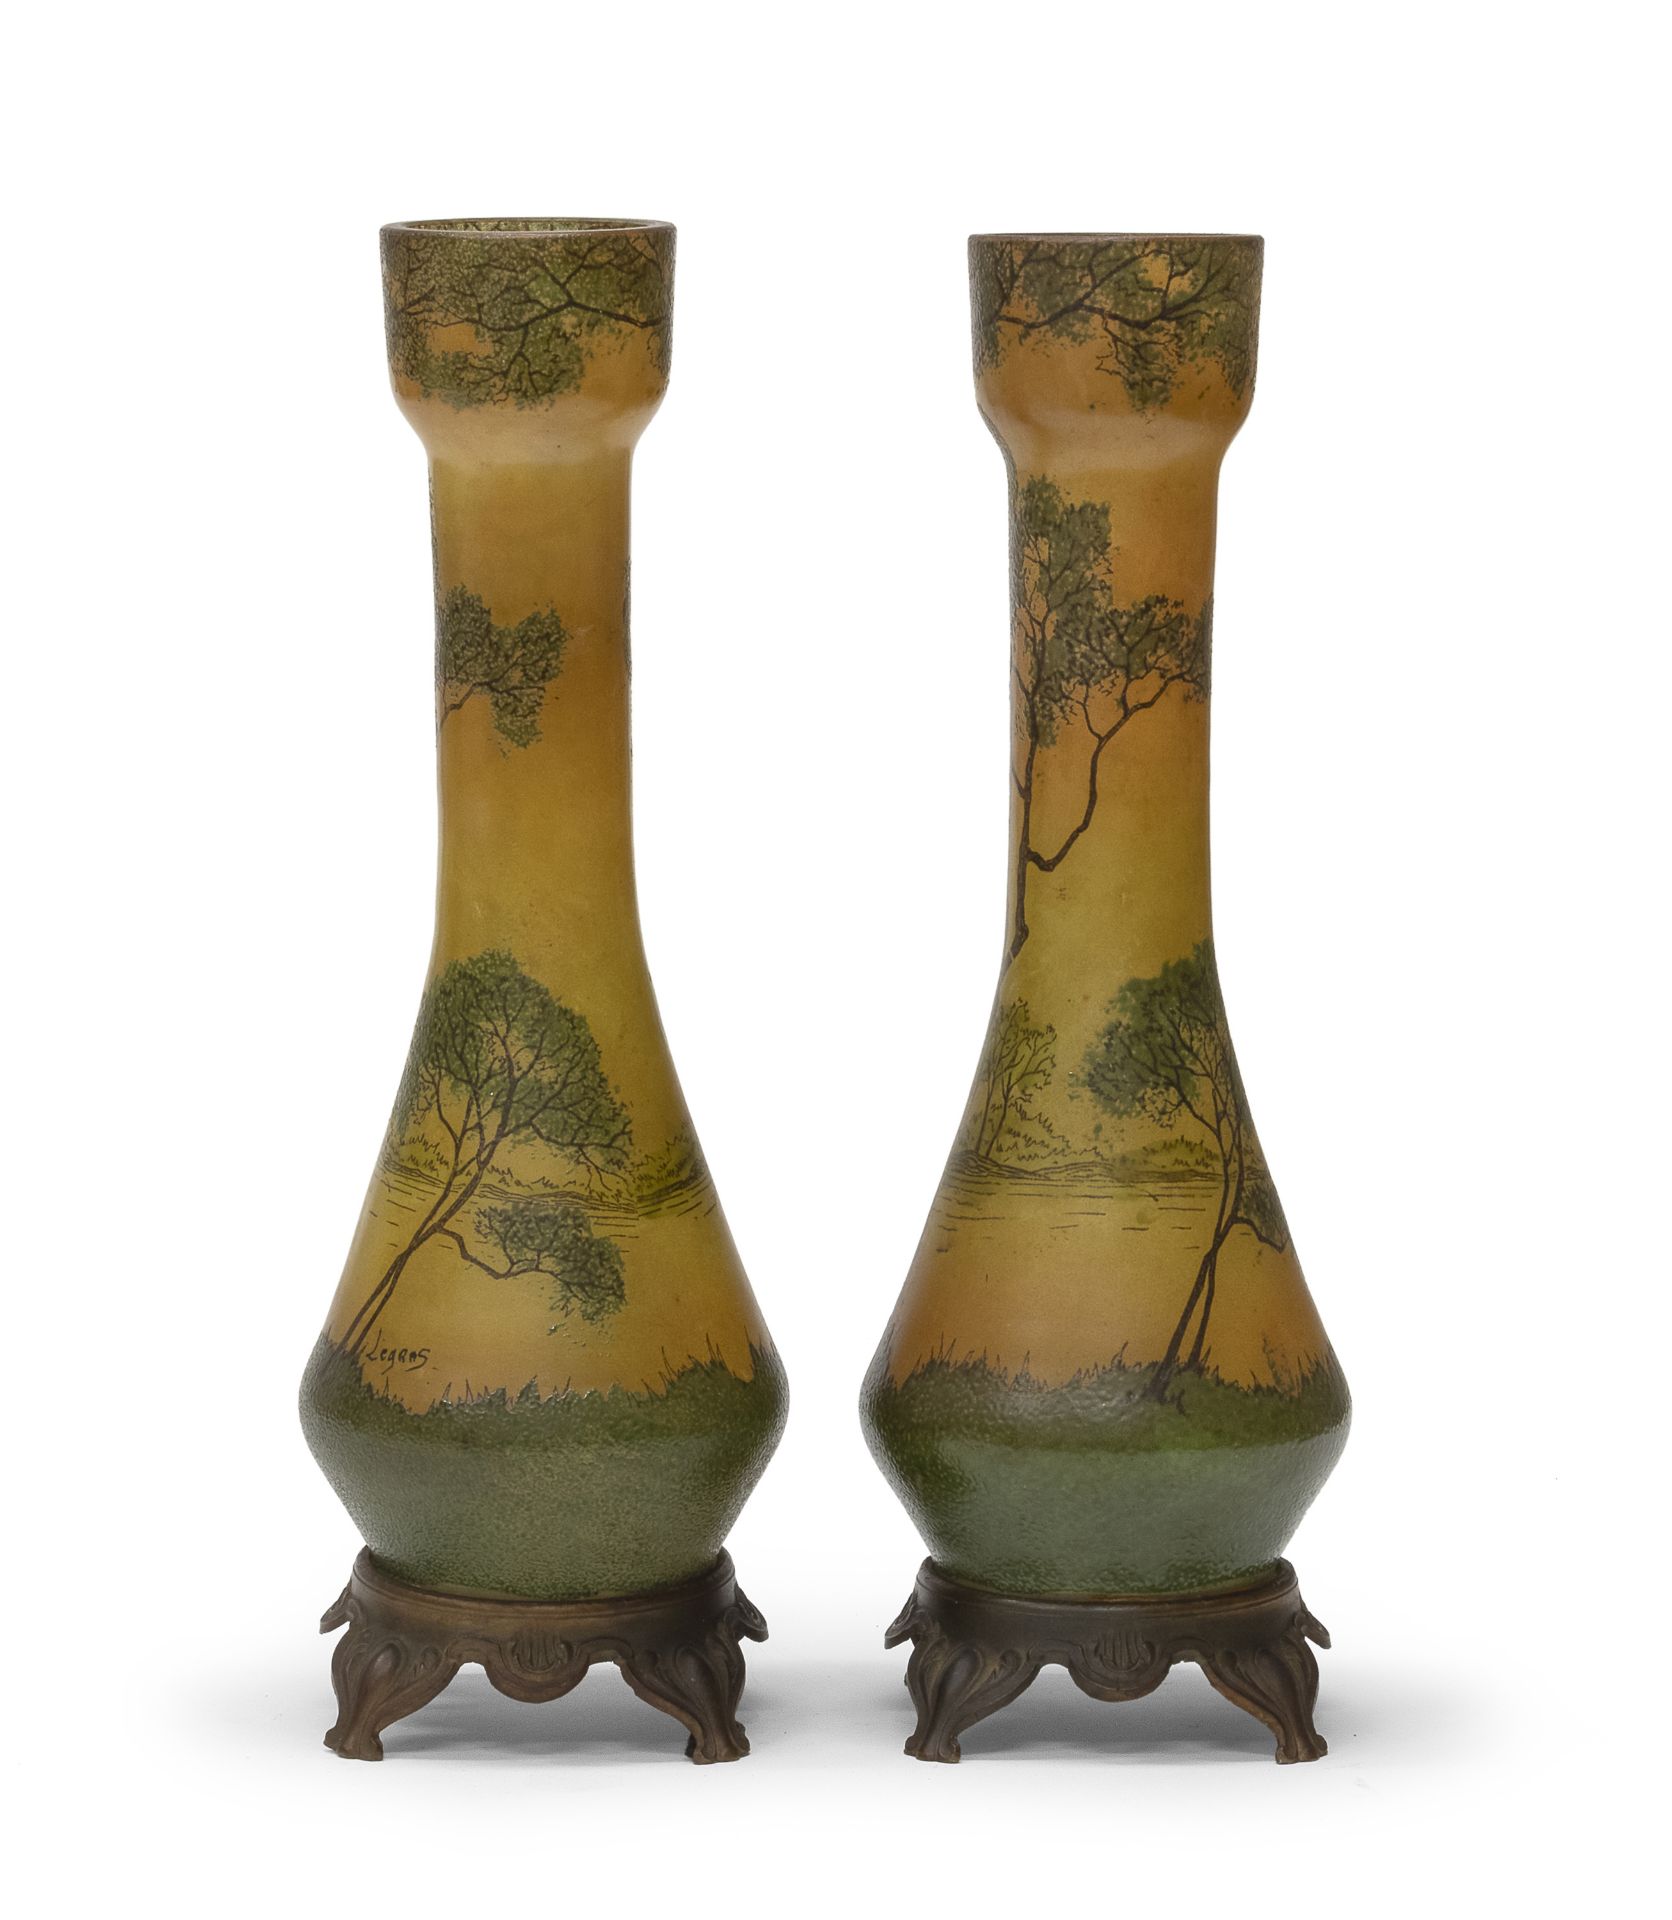 PAIR OF GLASS PASTE VASES LEGRAS EARLY 20TH CENTURY